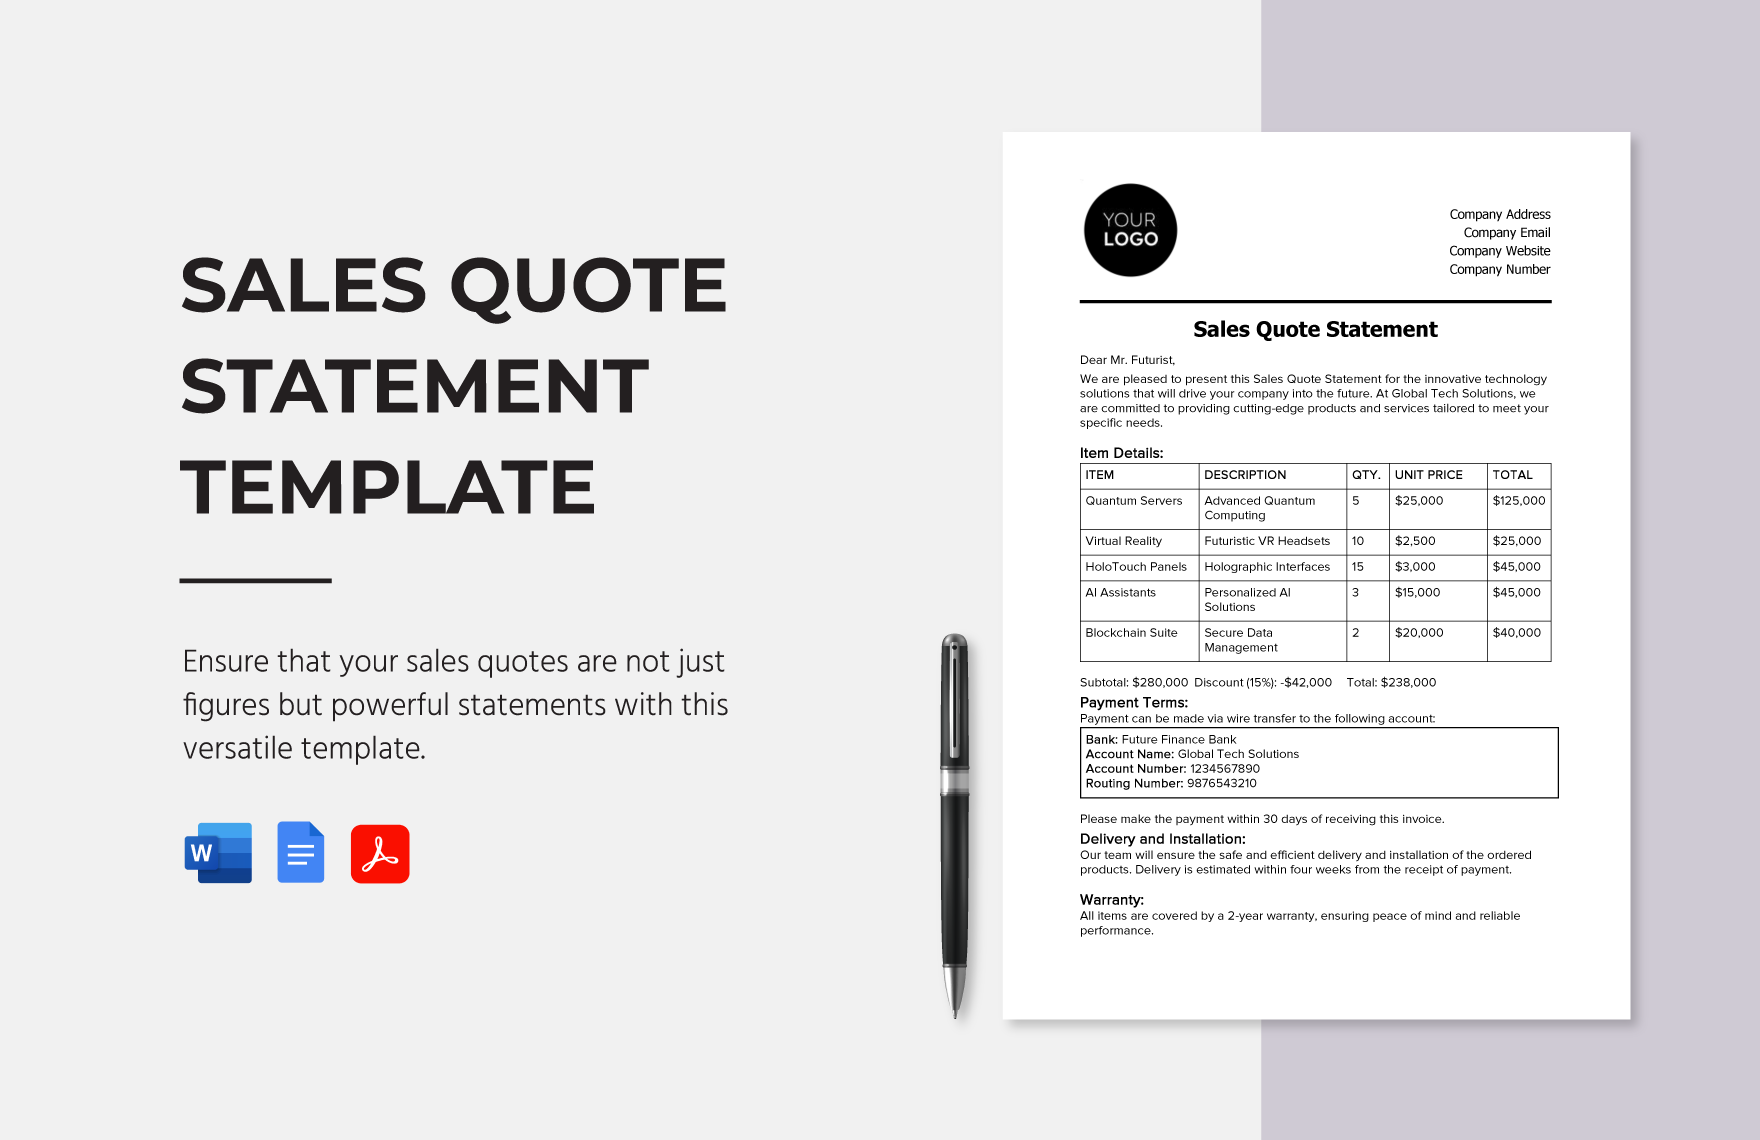 Sales Quote Statement Template in Word, PDF